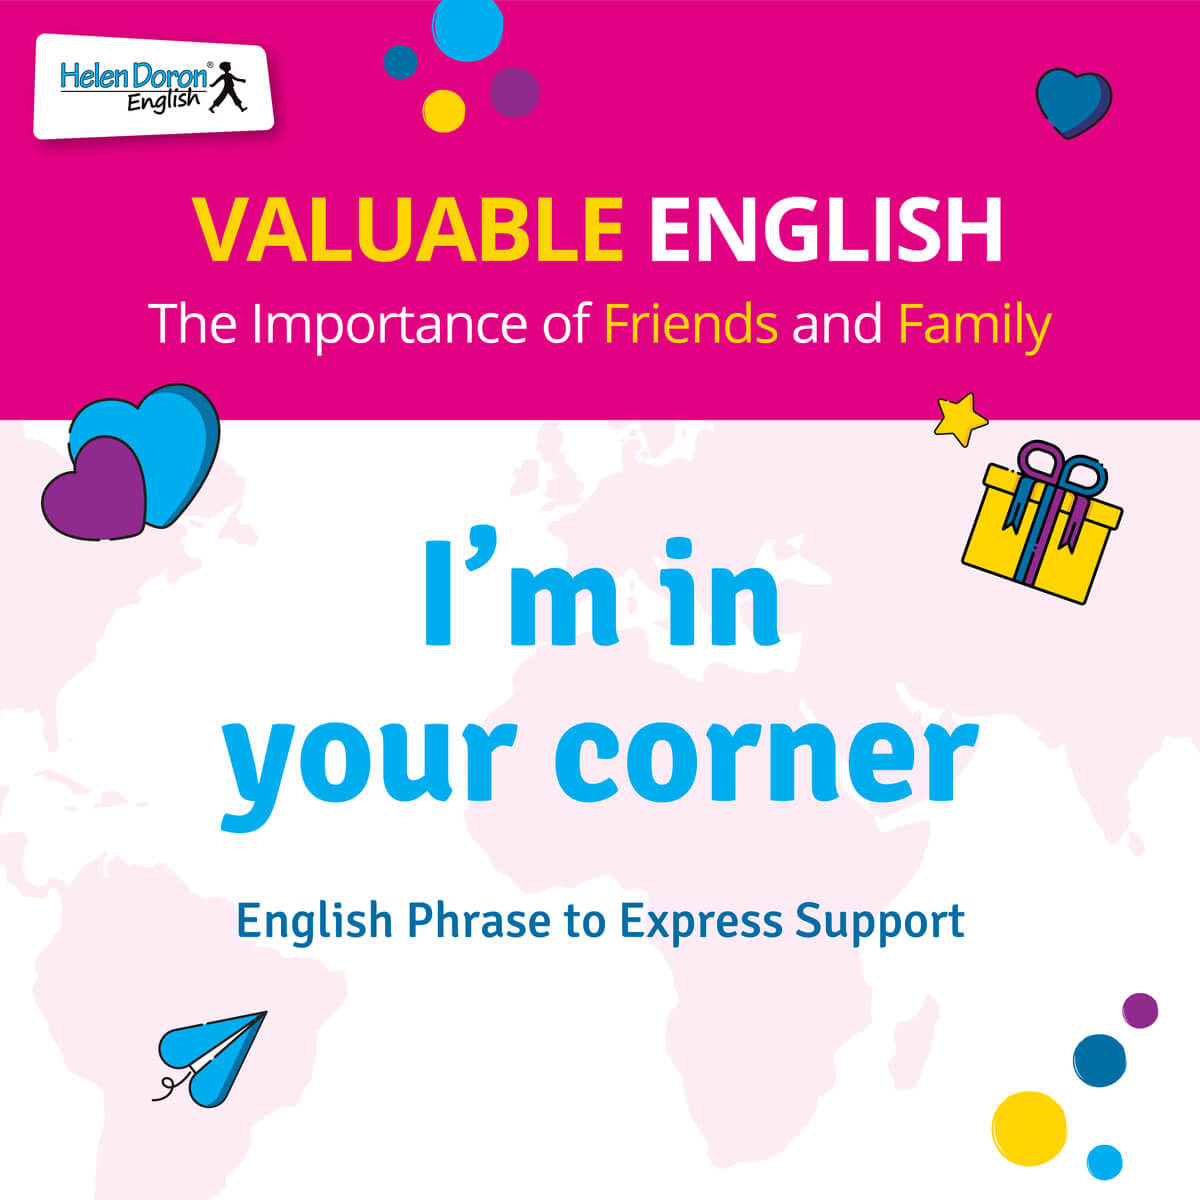 I'm in your corner - English phrase express support